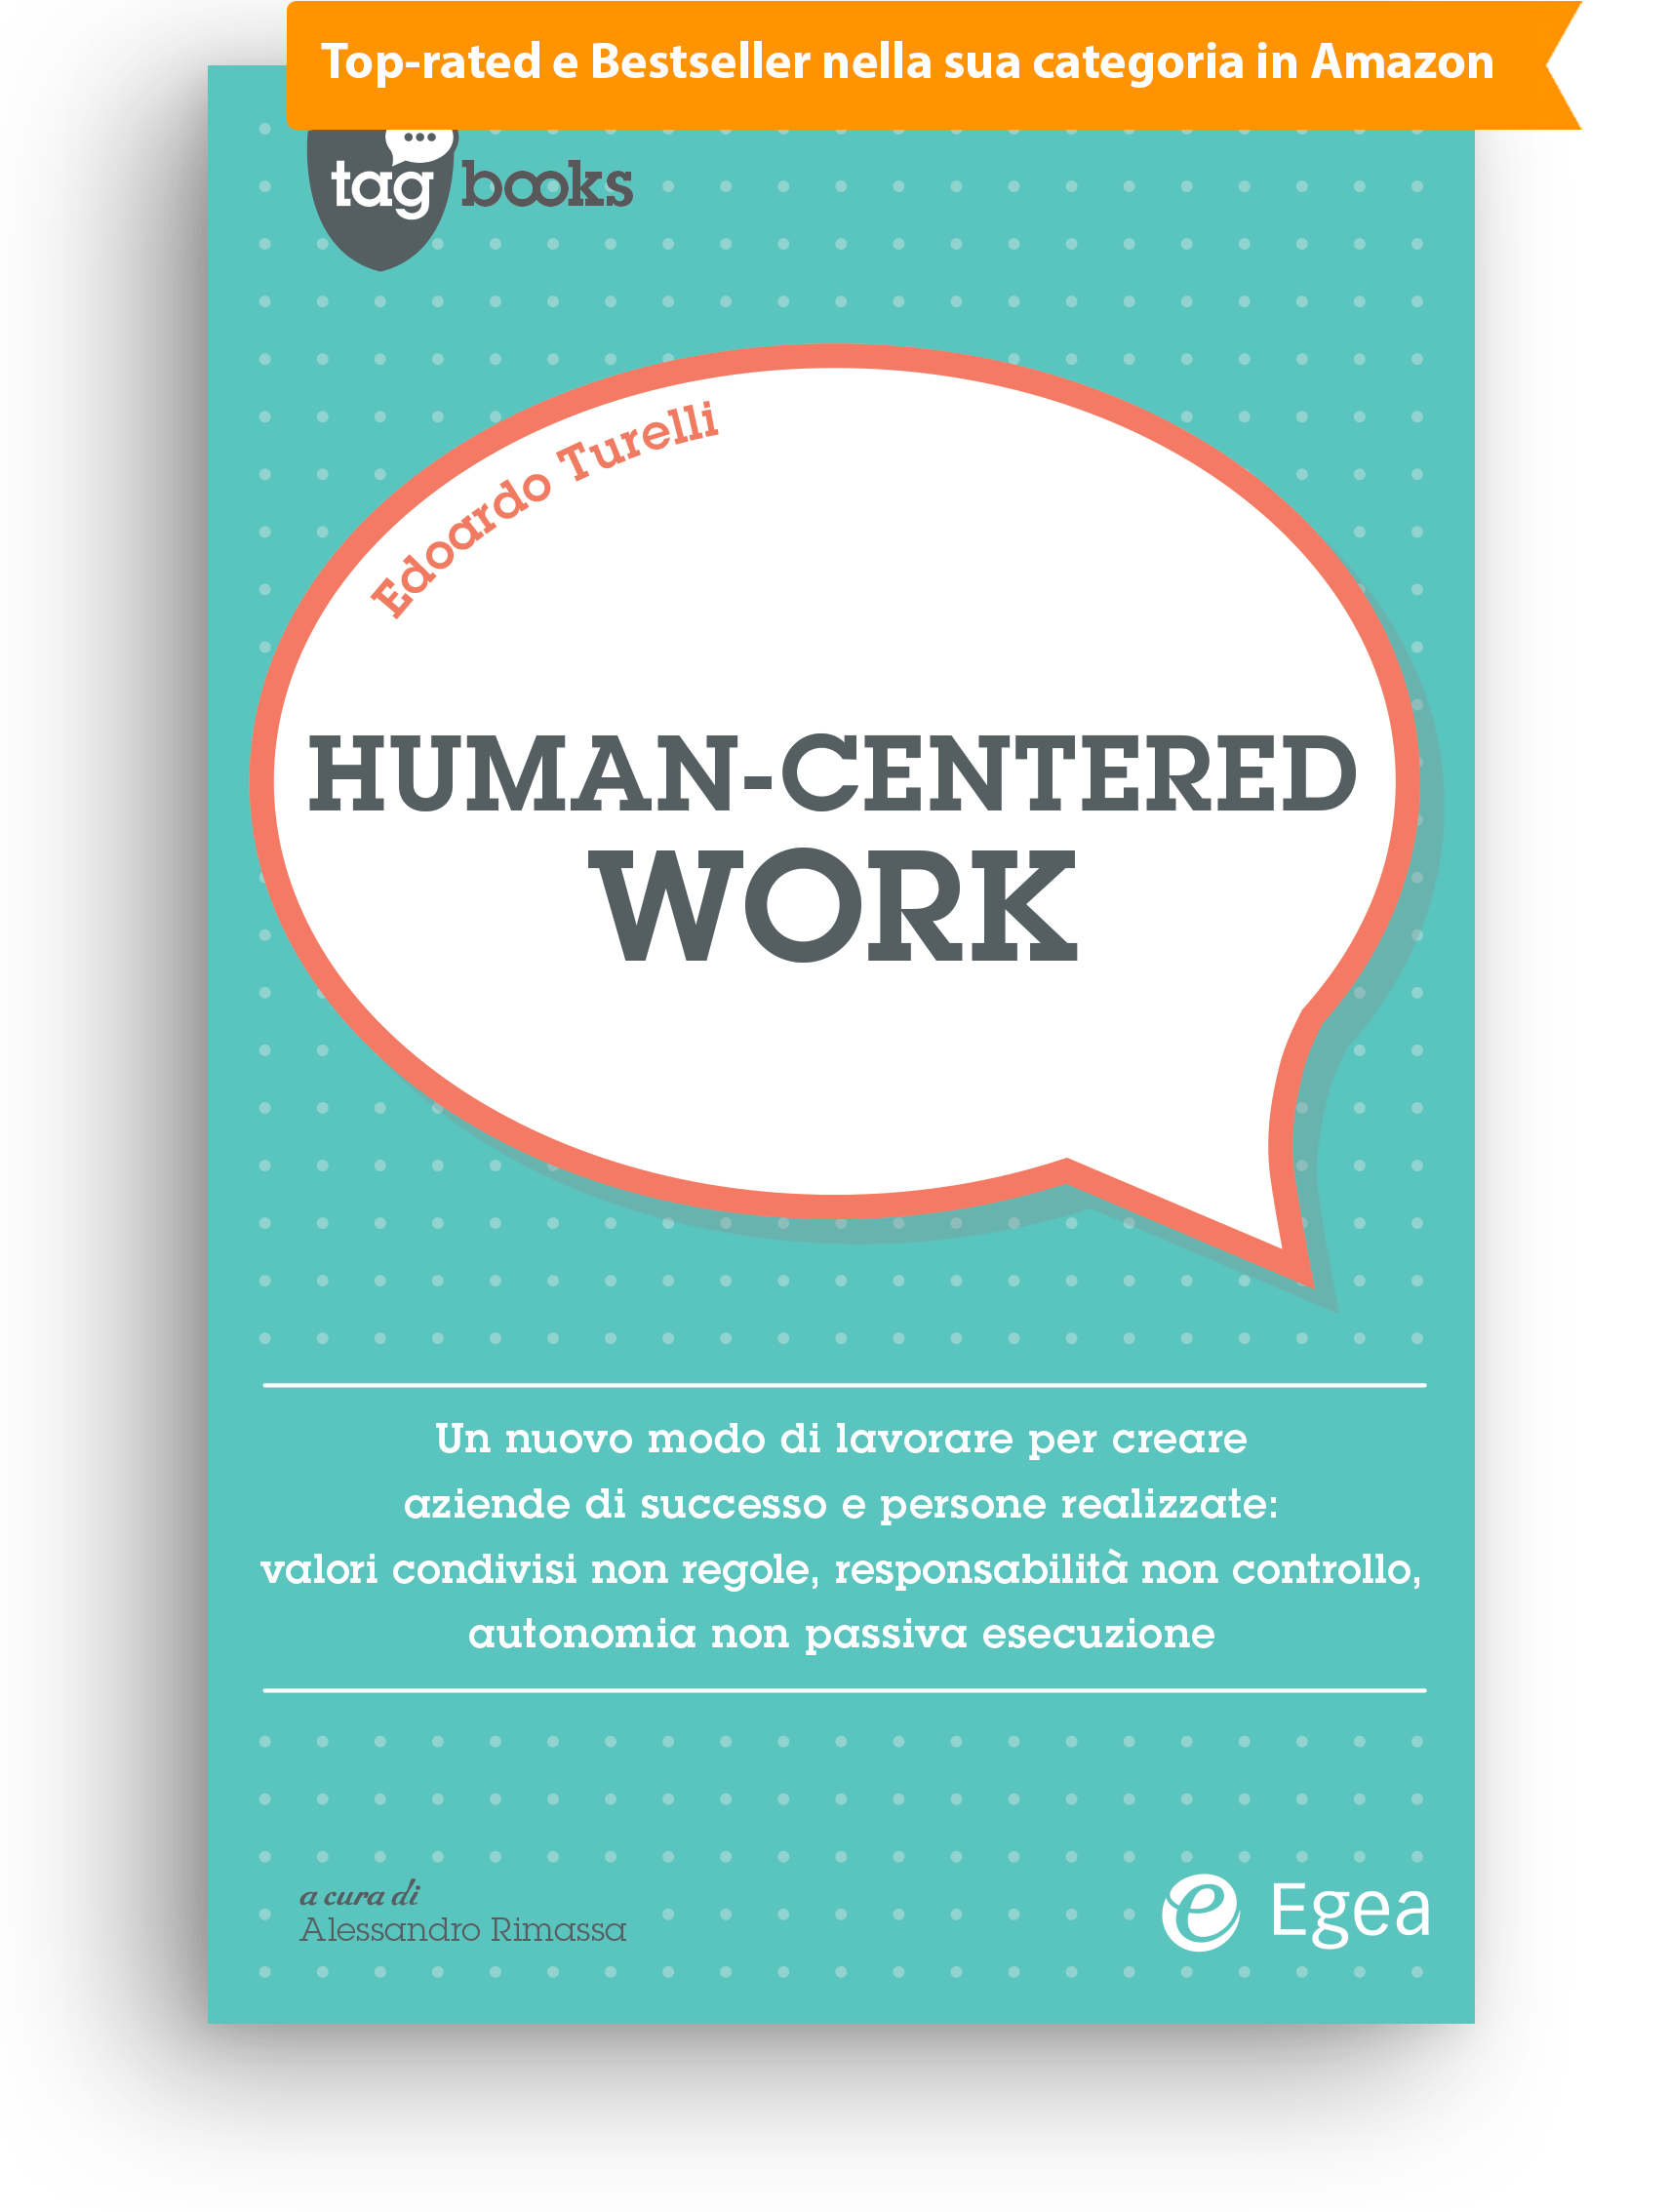 Human-Centered Work - Book Cover.png